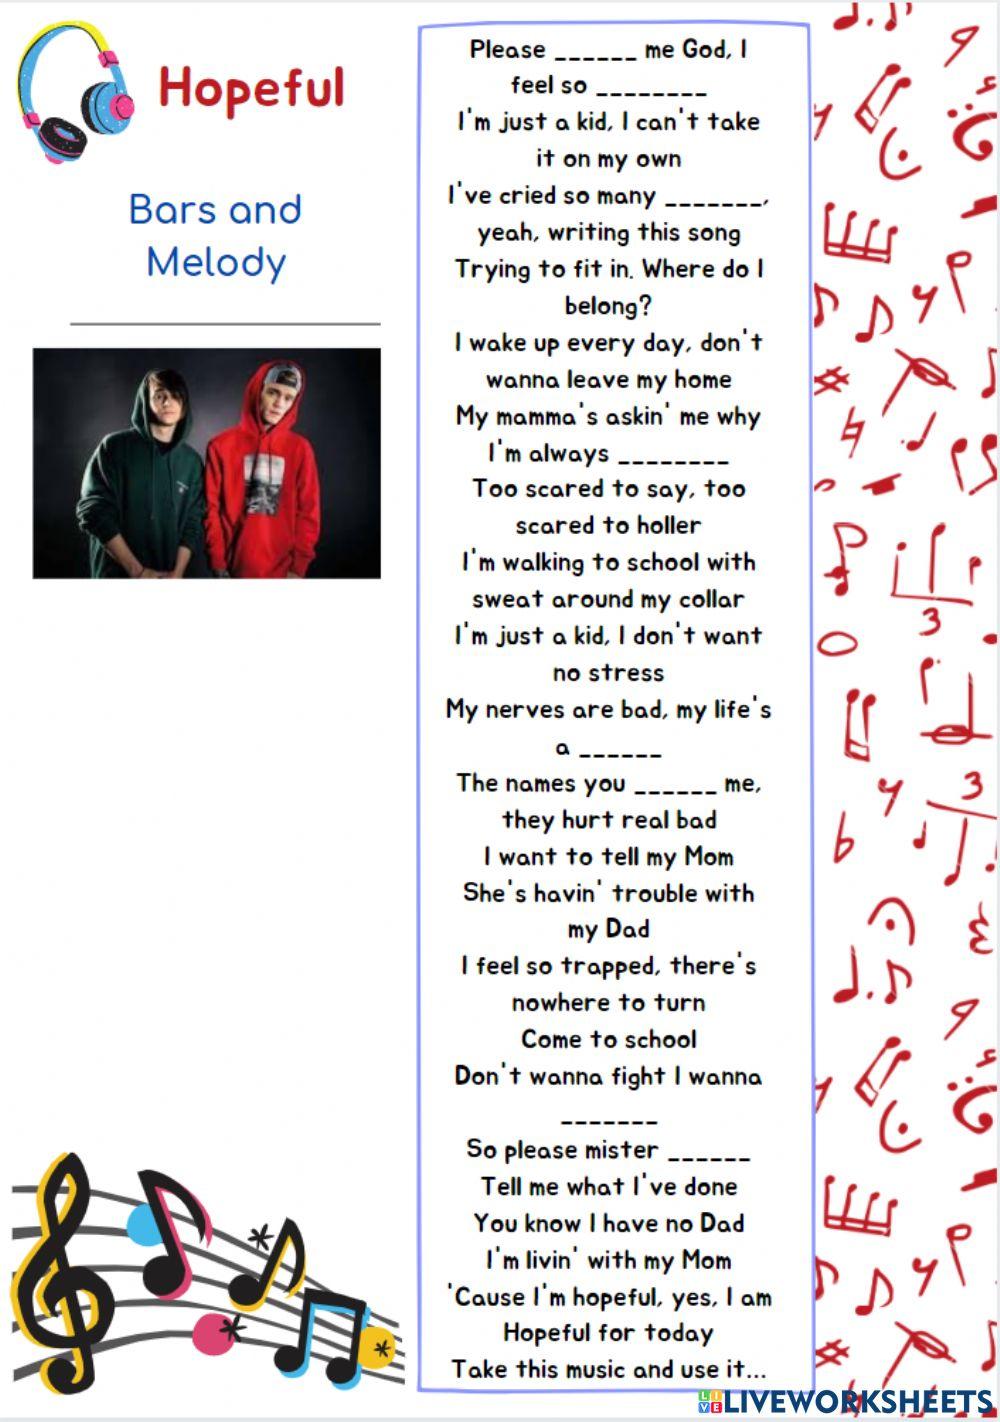 Song: Helpful-Bars and Melody